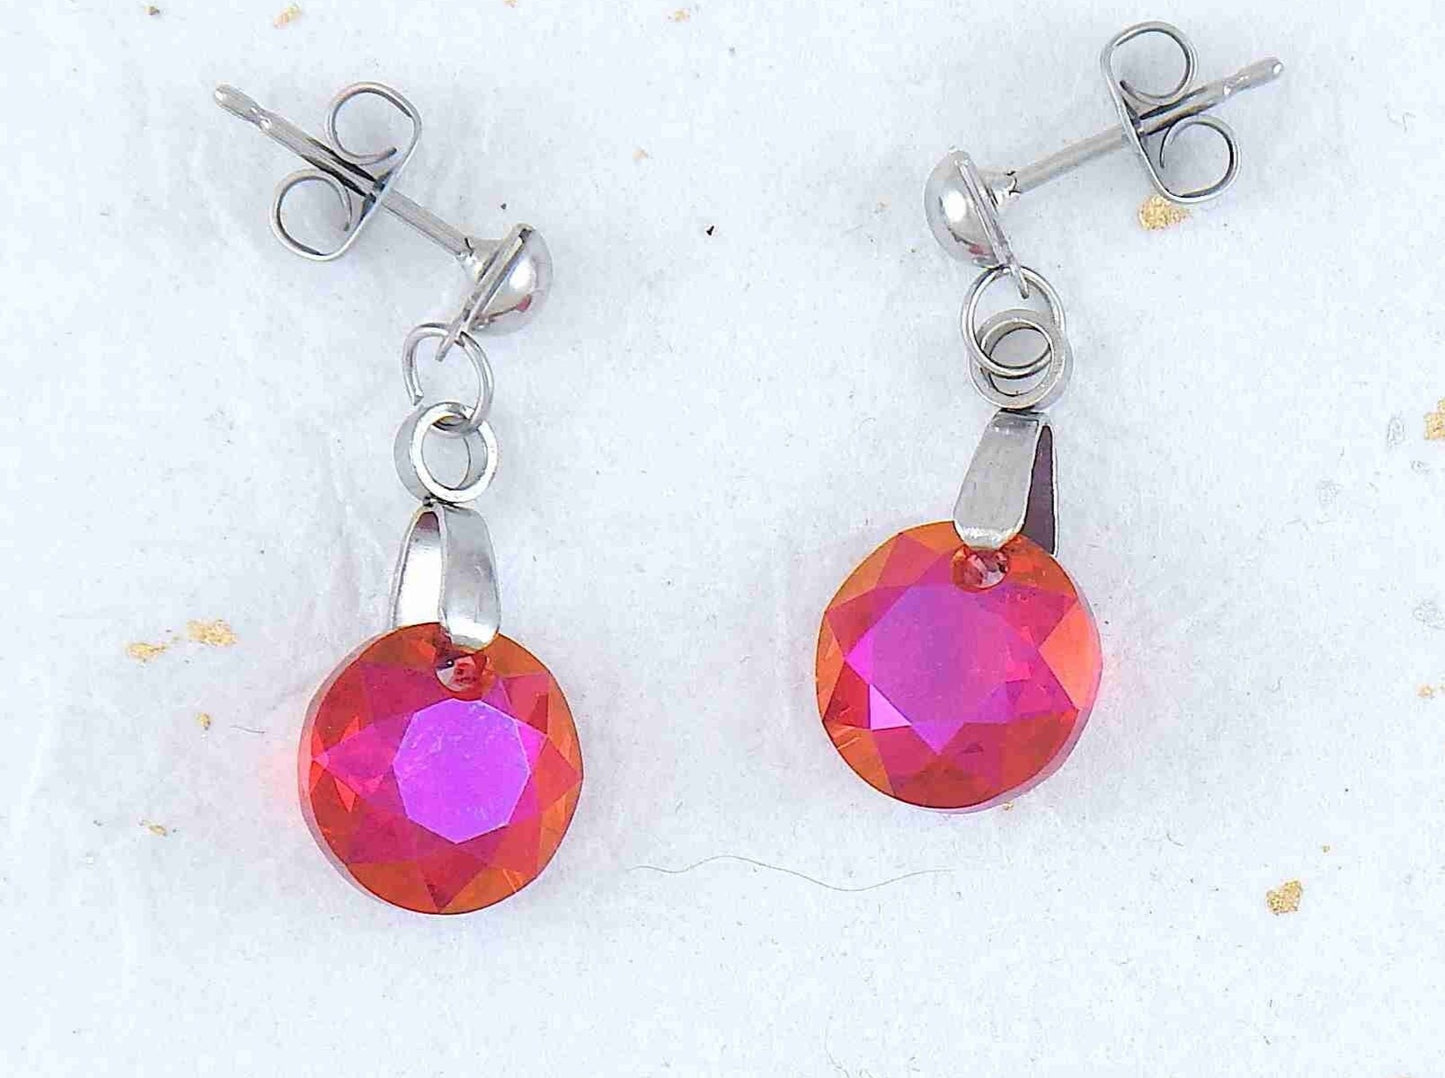 Short earrings with 10mm Astral Pink/Light Siam (red/pink) Classic Cut Swarovski crystals, stainless steel studs with tiny crystals